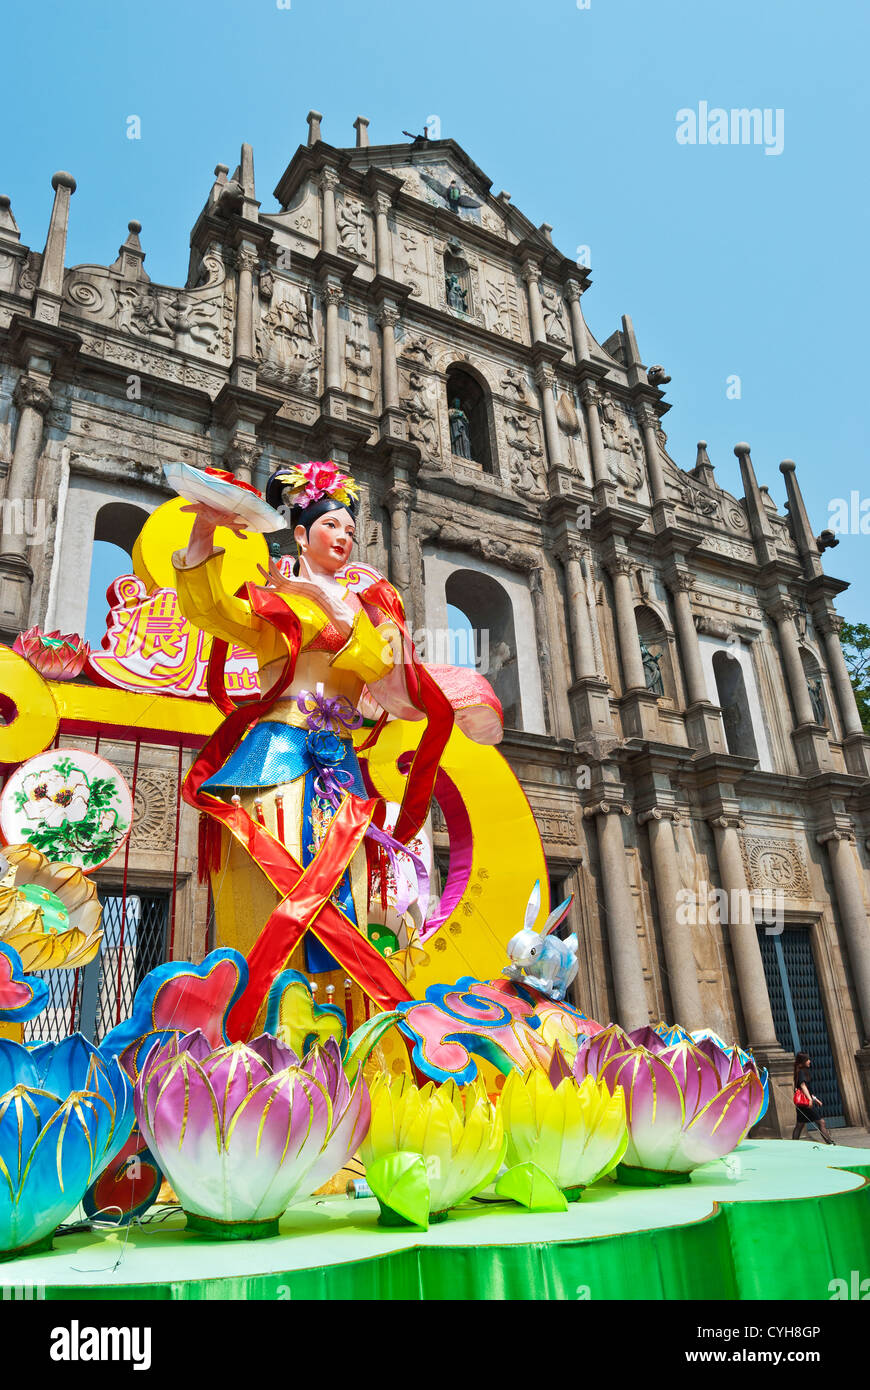 Ruins of St Paul's Macau with Mid-Autumn Festival decorations Stock Photo